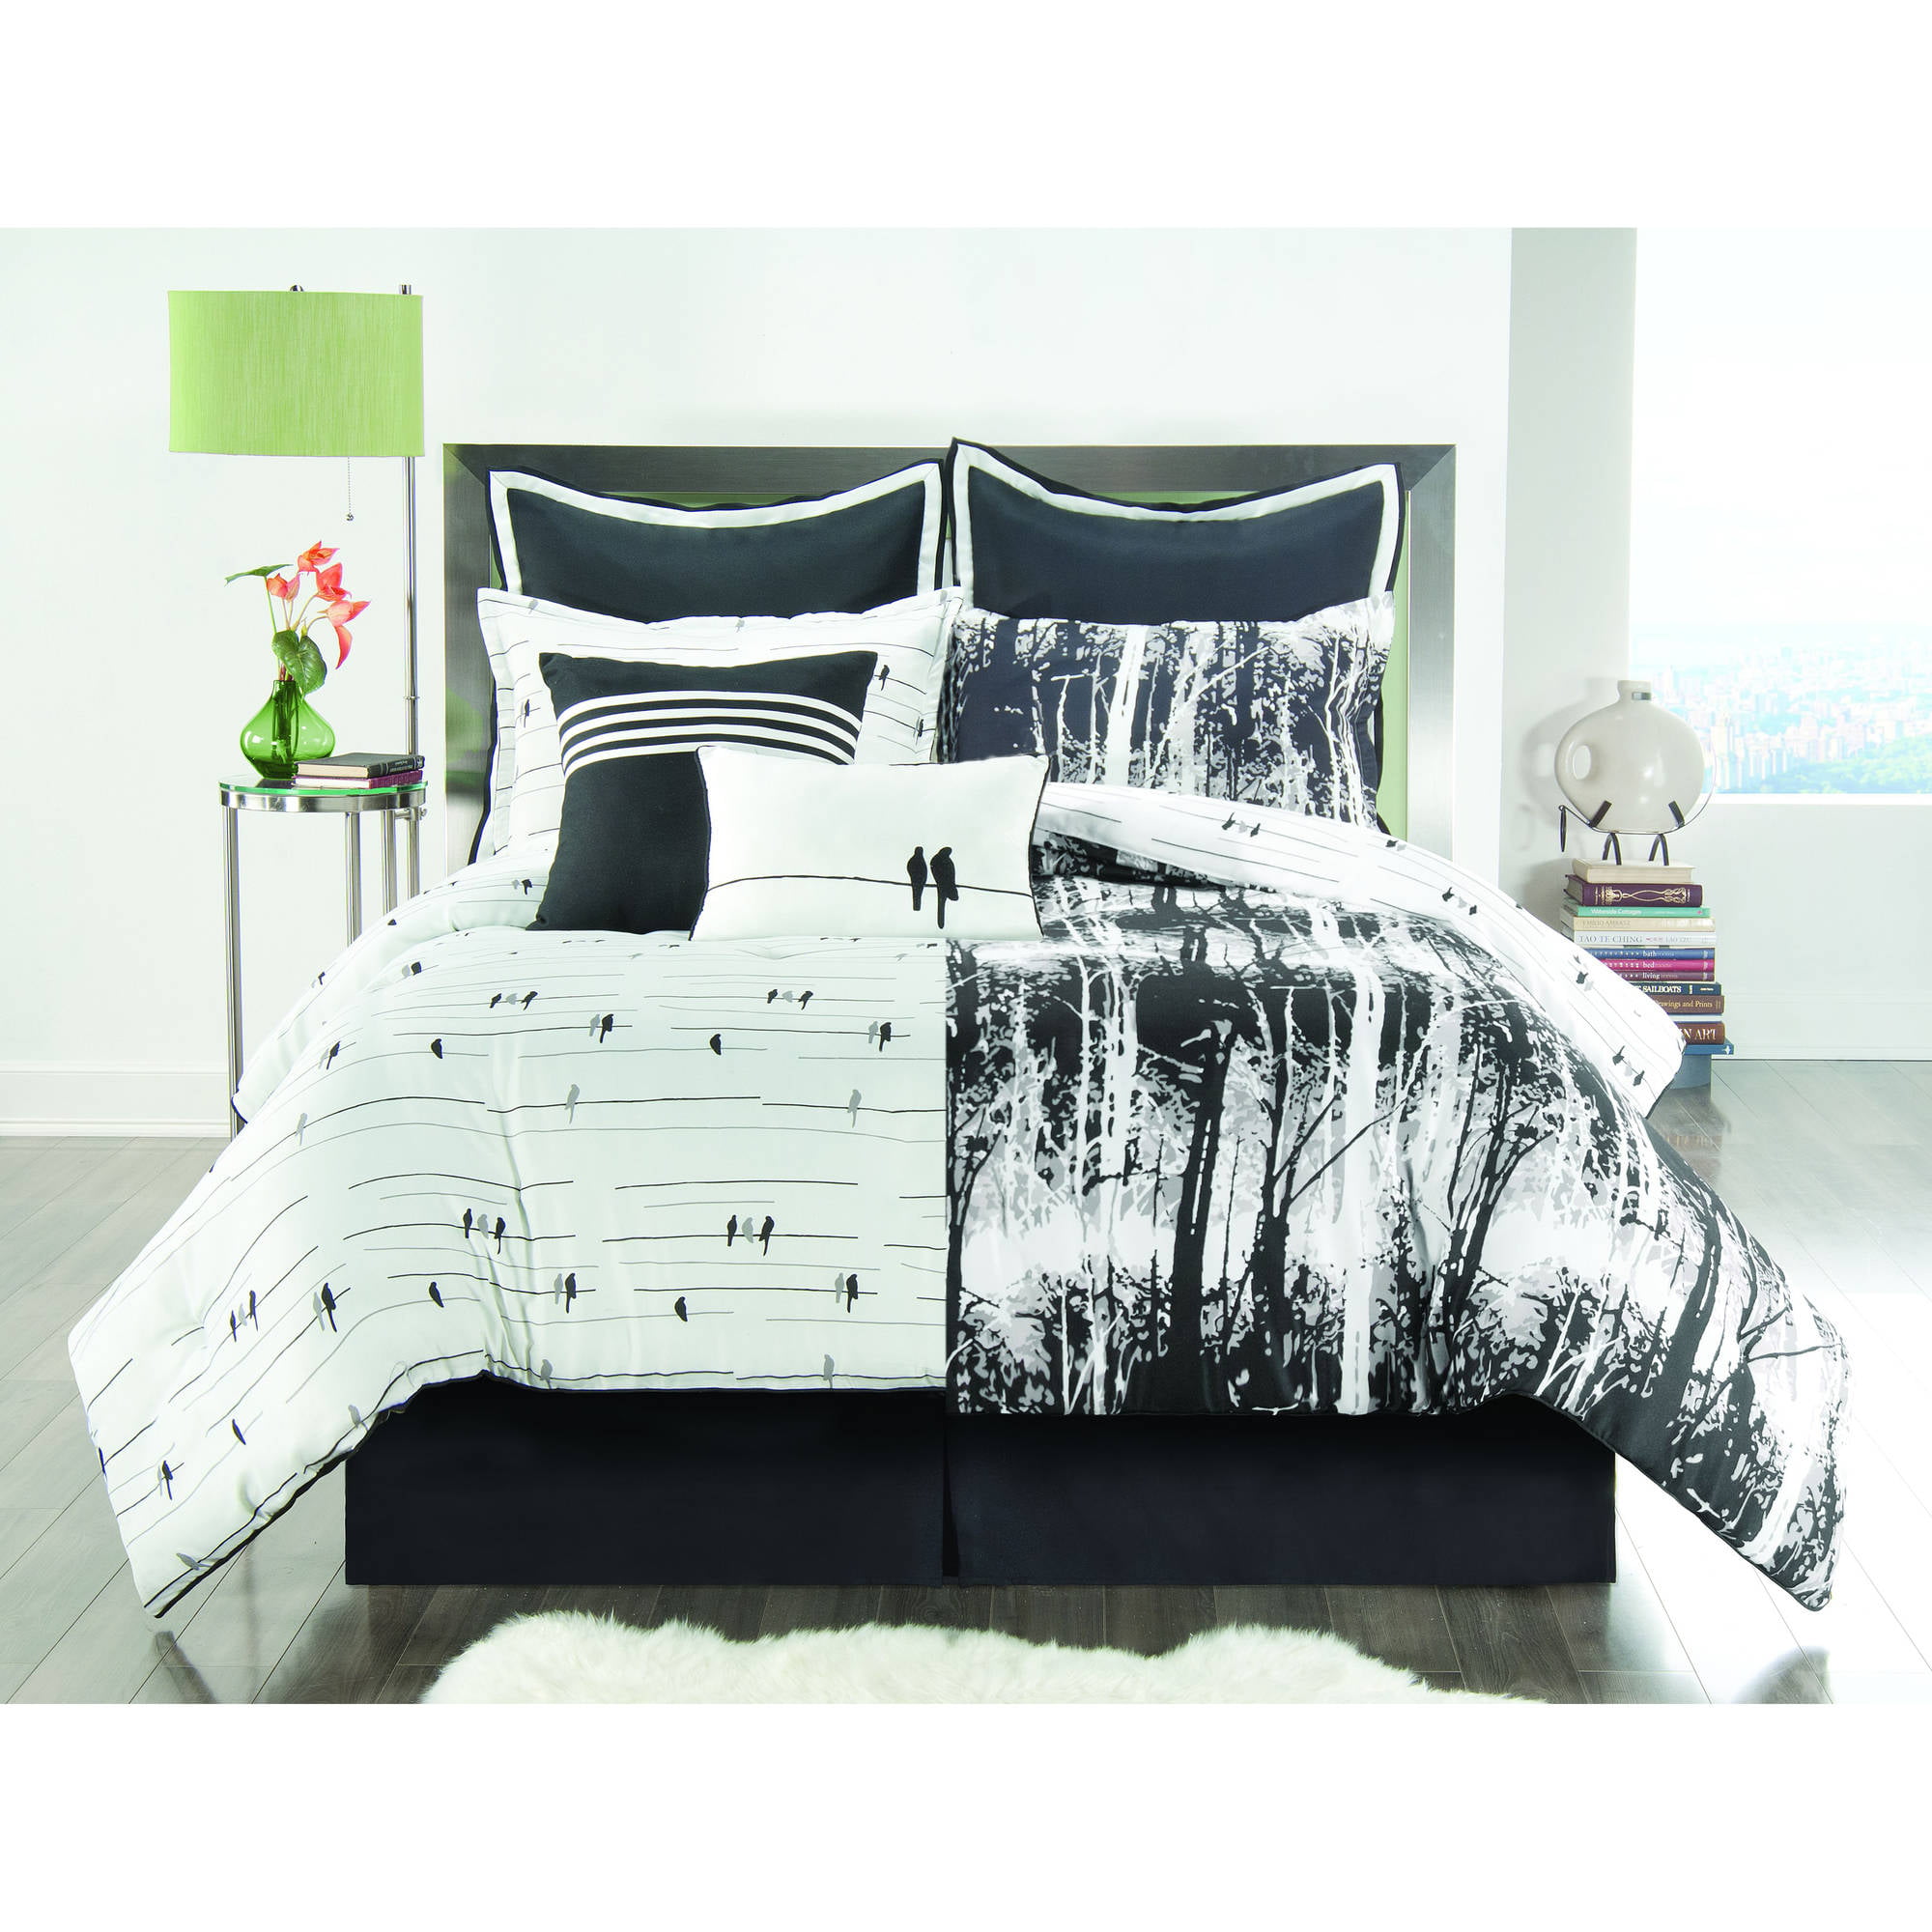 Vcny Home Woodland 8 Piece Black And White Nature Inspired